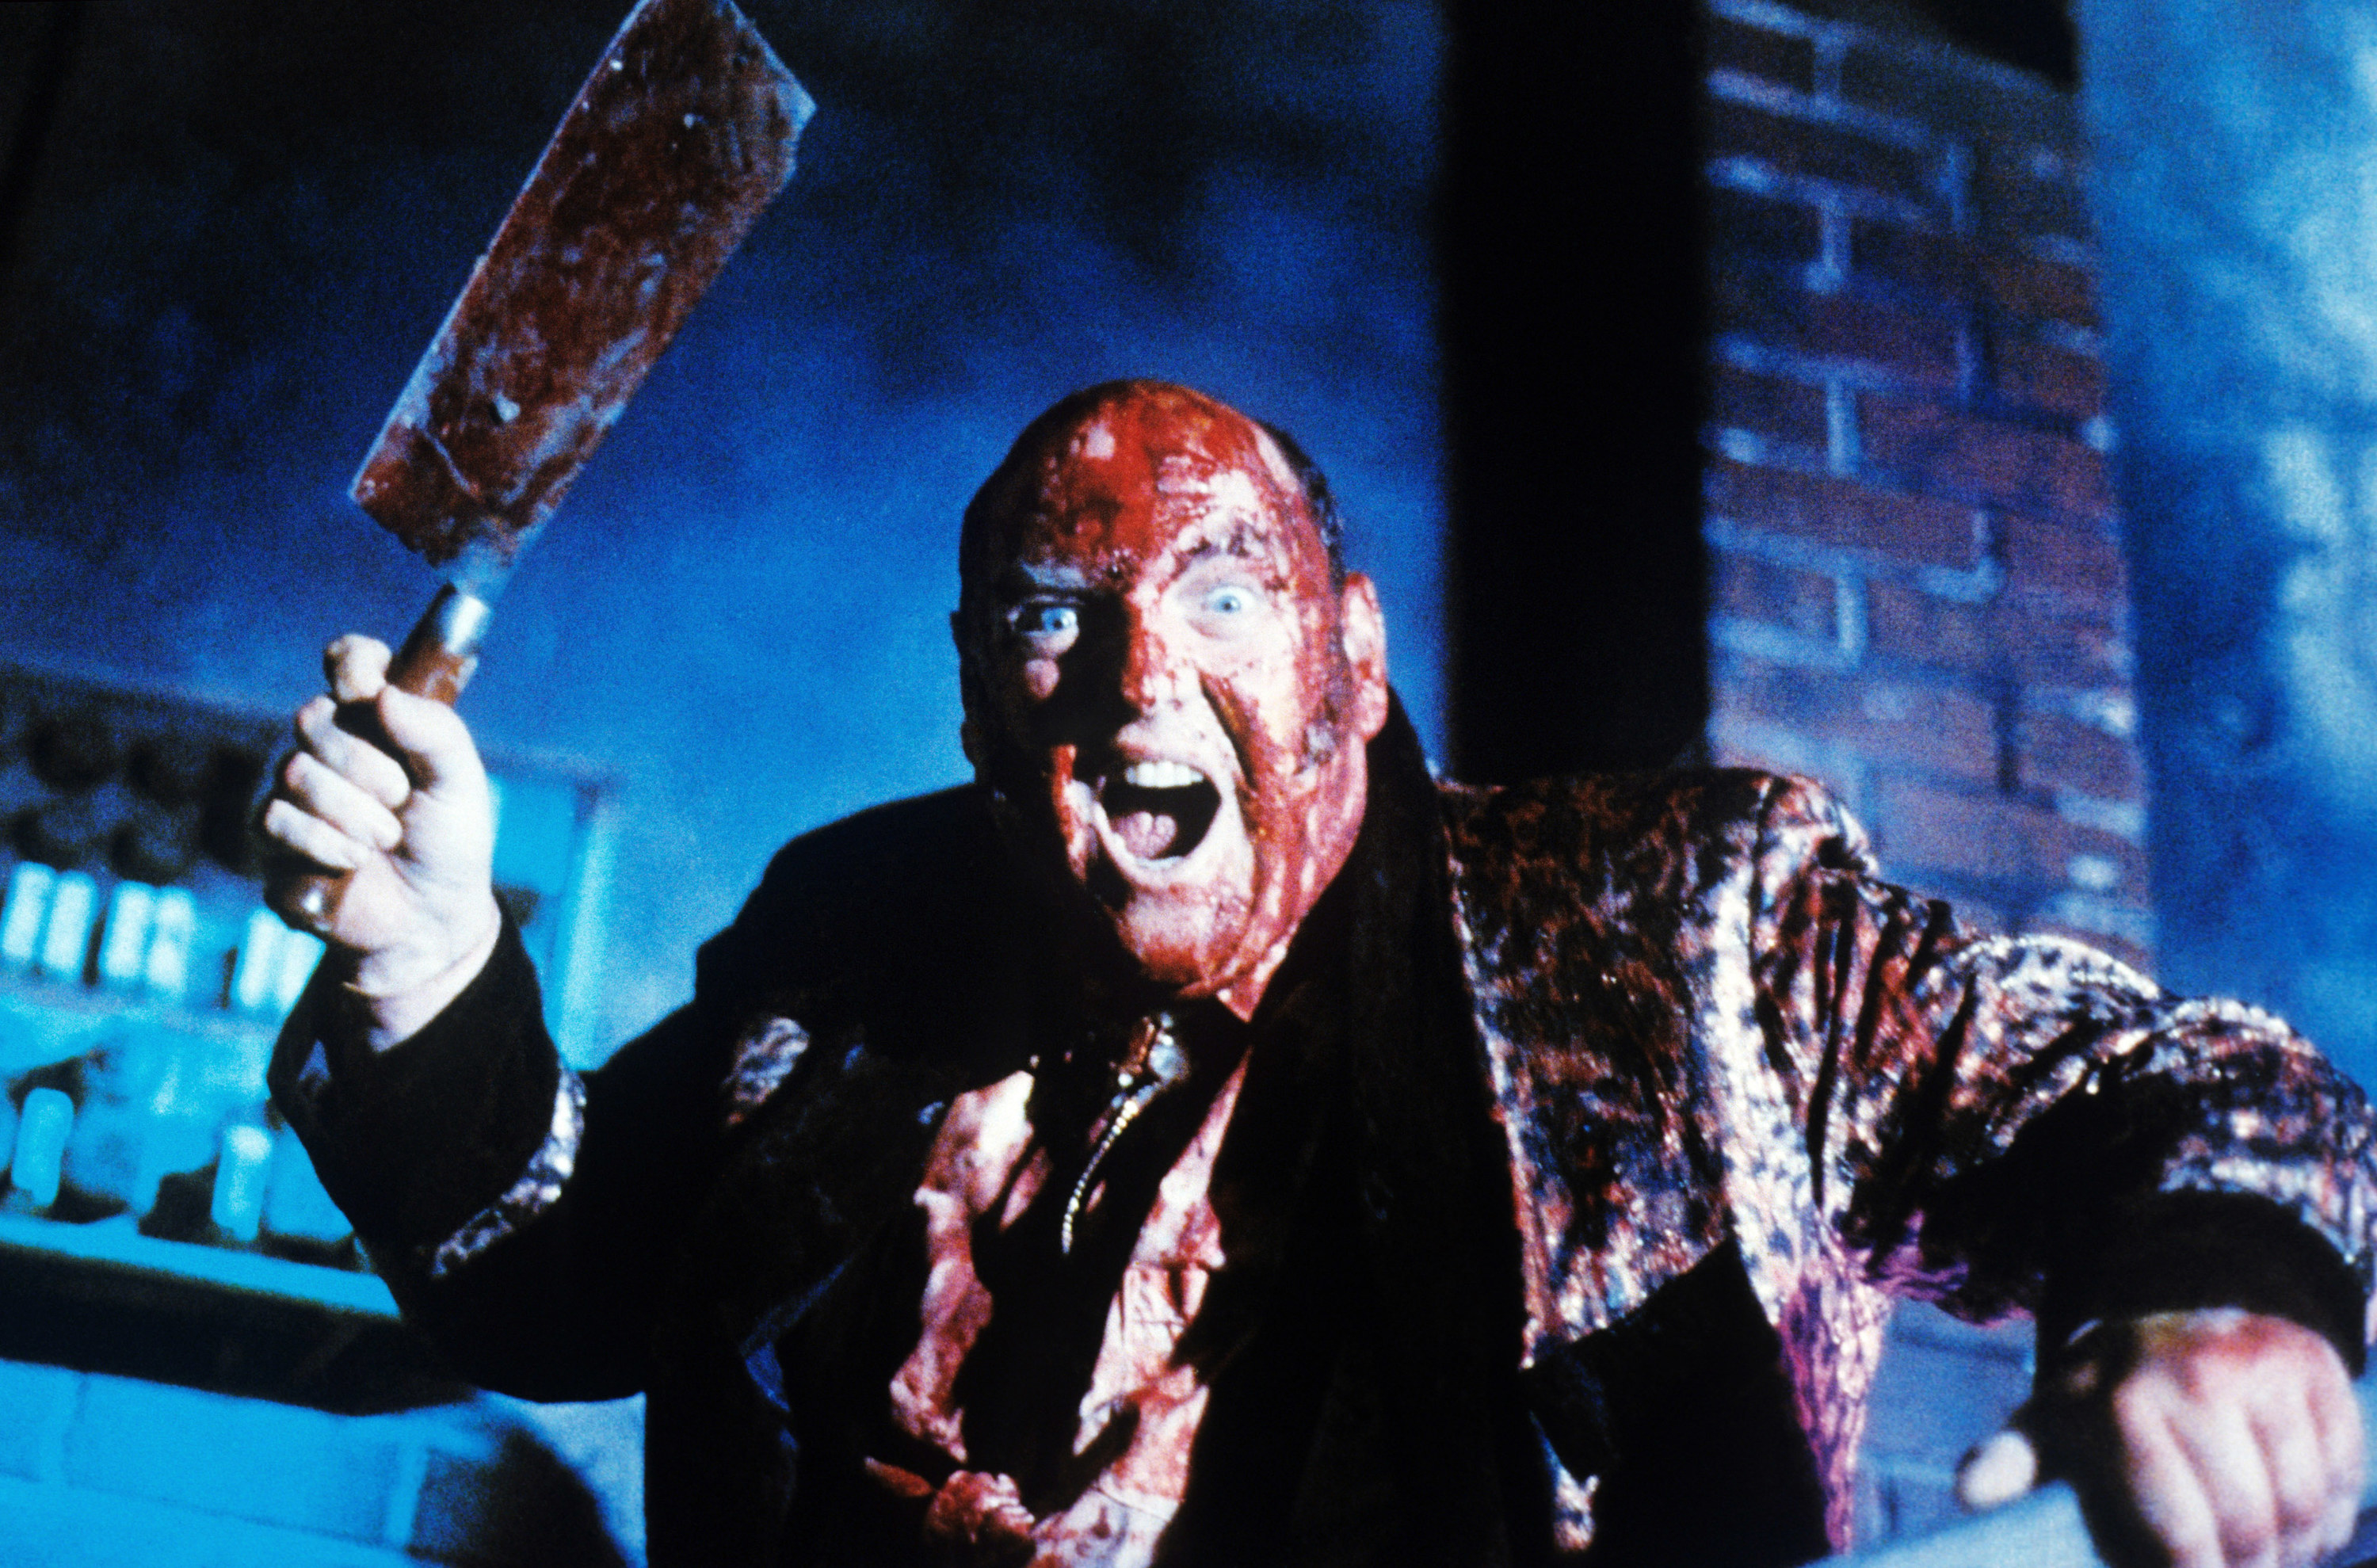 A man covered in blood holds a butcher knife